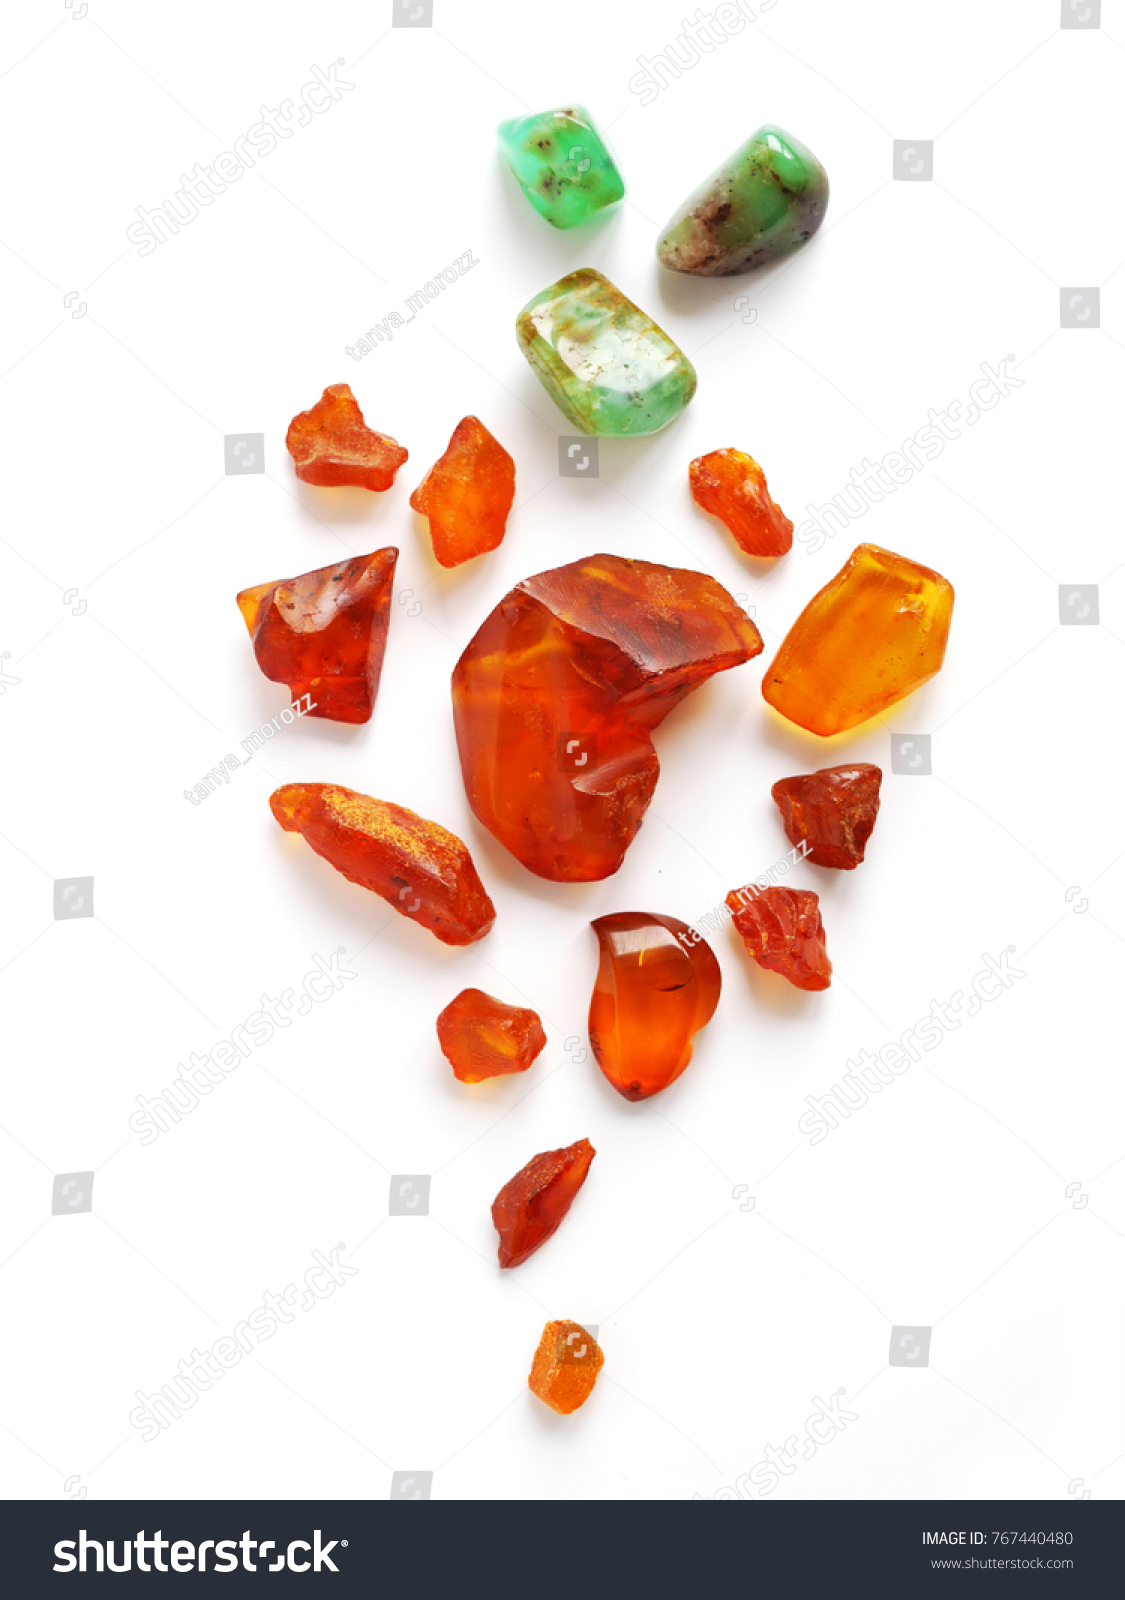 Composition of natural stones of amber and chrysoprase. Amber stone isolated on white background. Natural raw amber. Jewelery from amber. #767440480